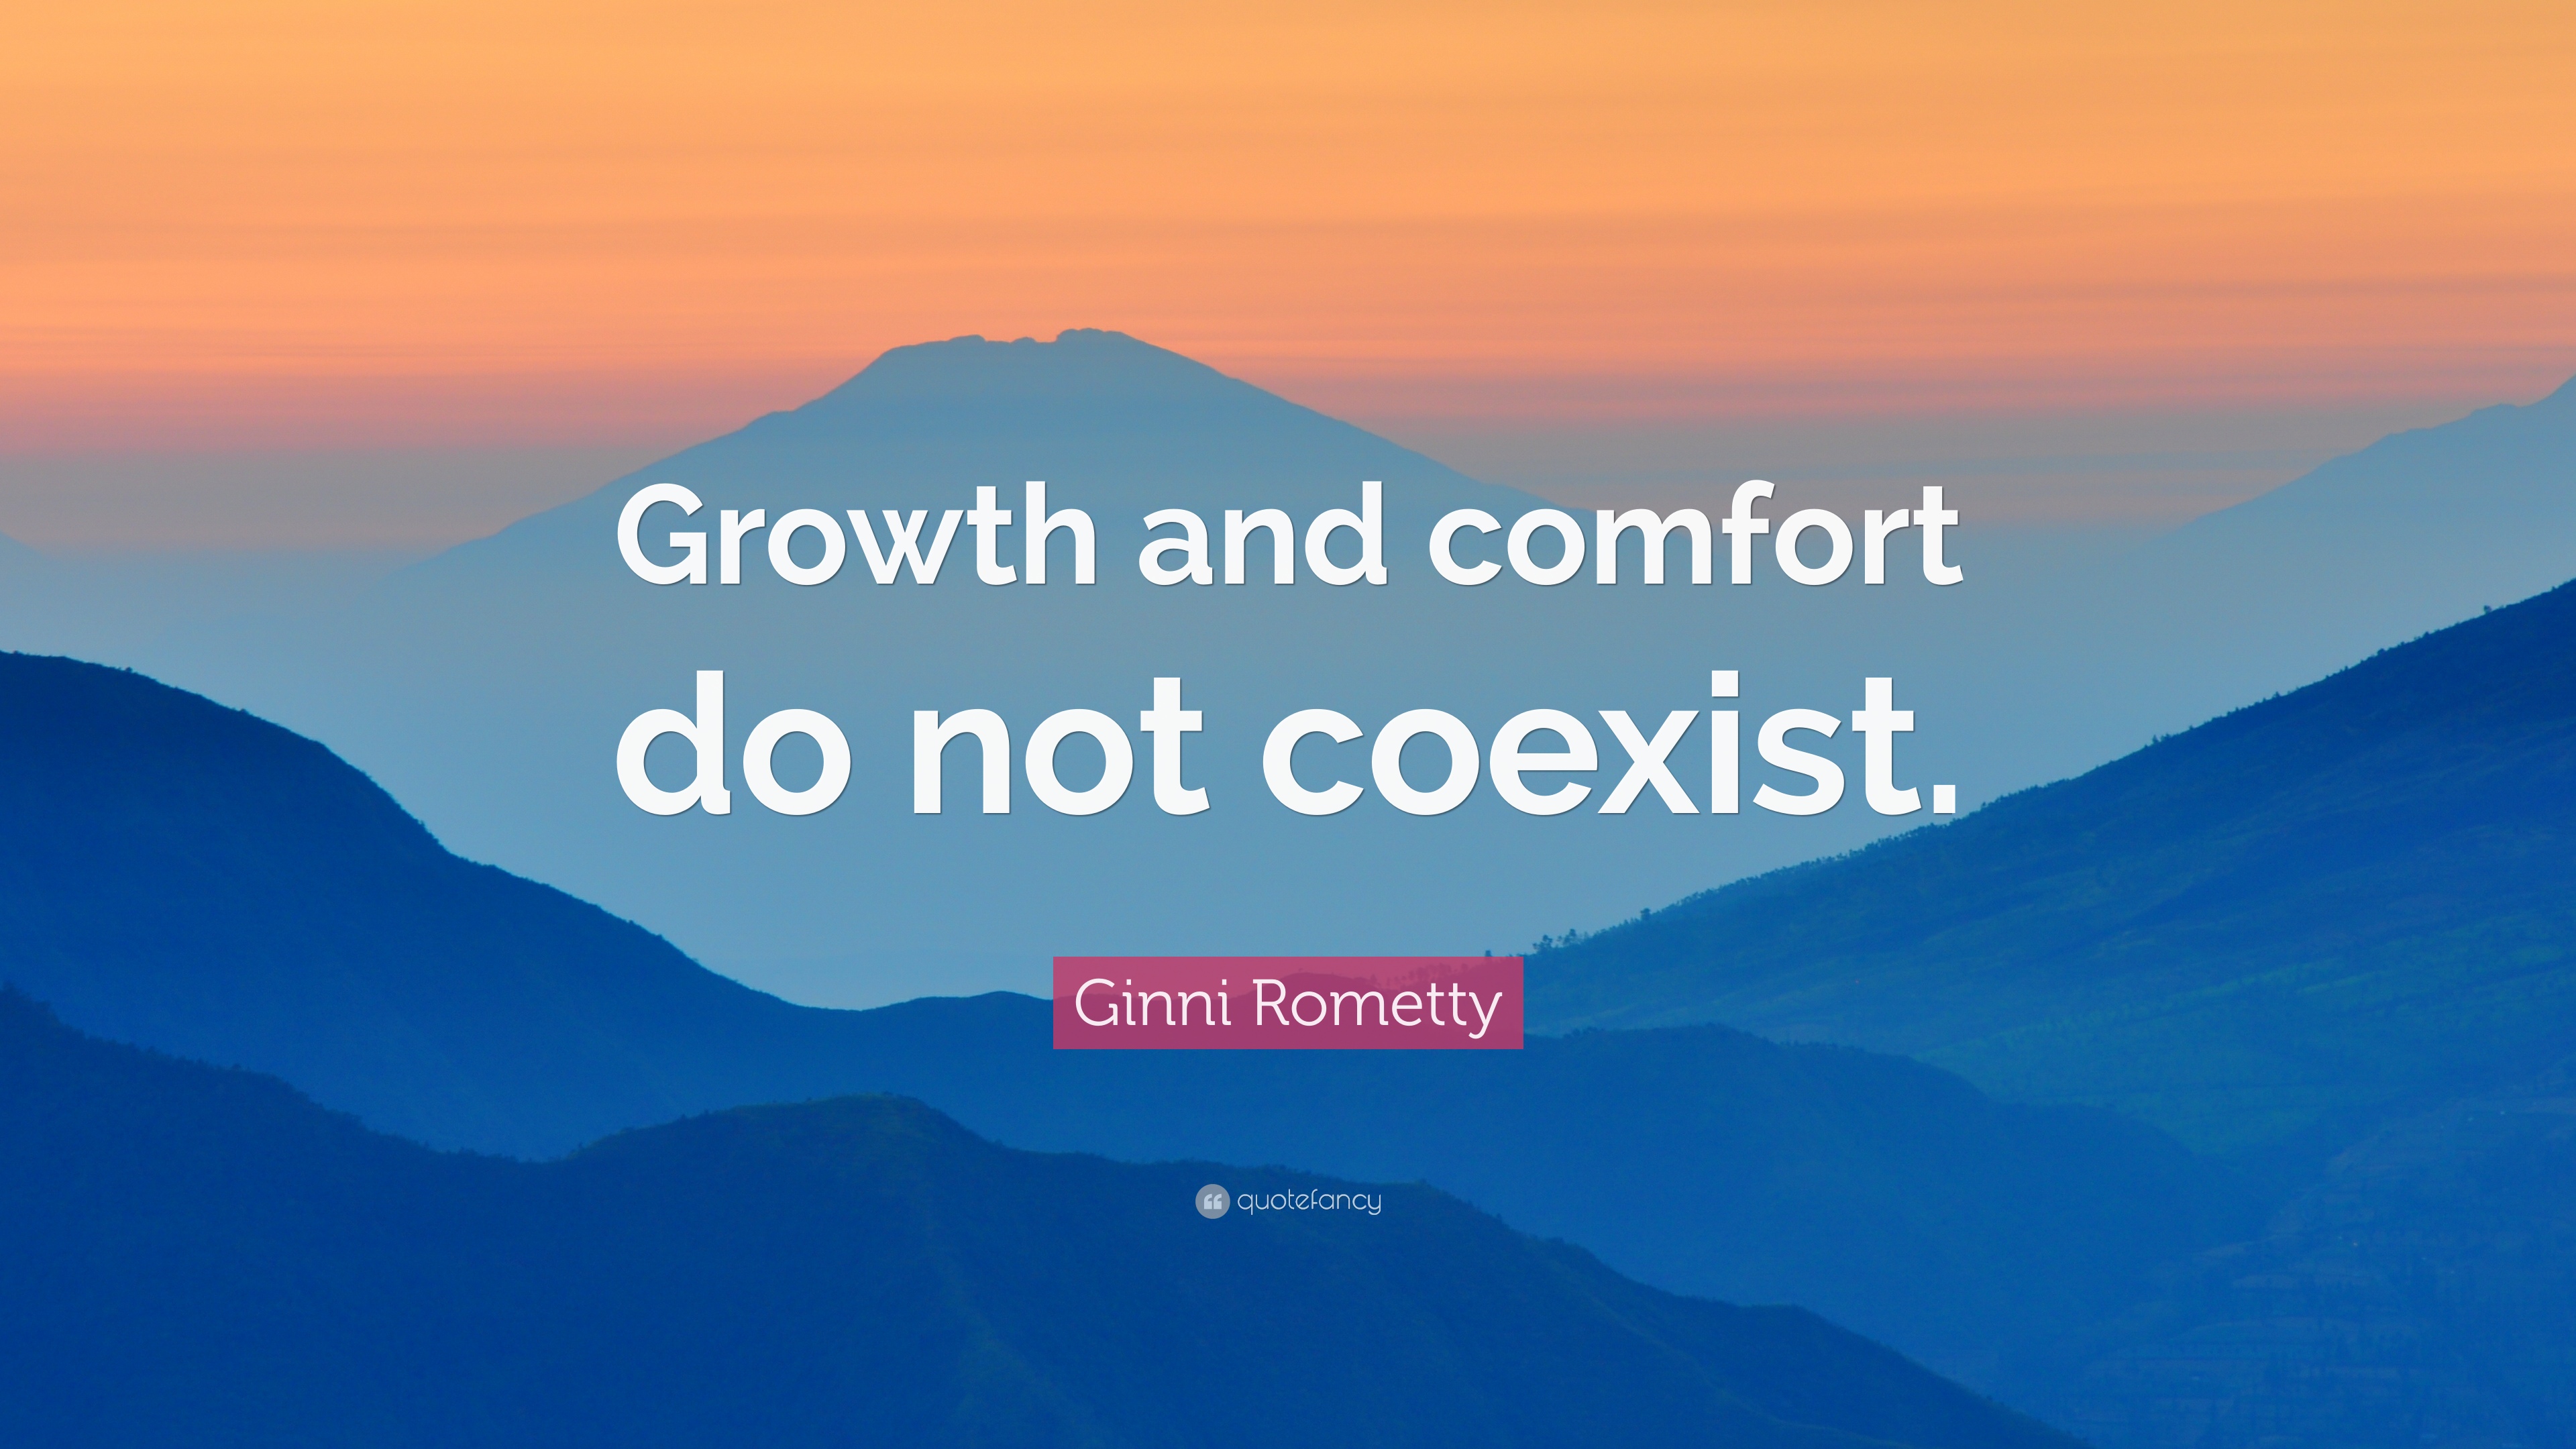 Growth and comfort do no coexist.